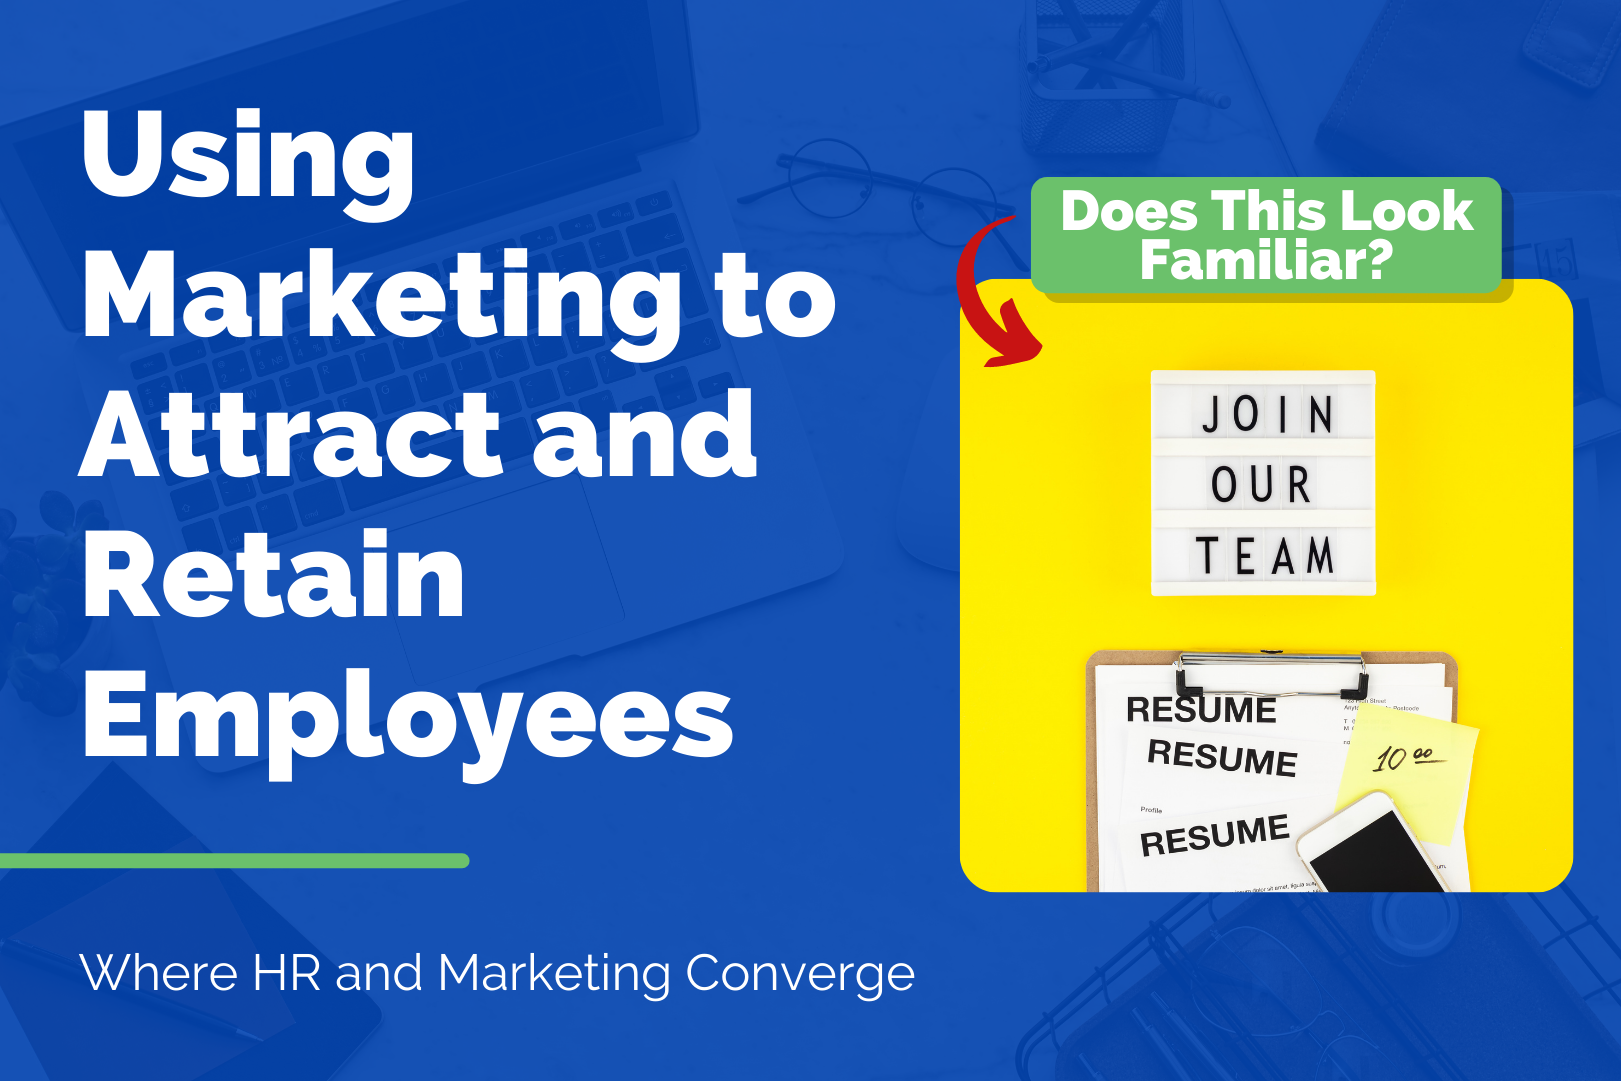 Using Marketing to Attract and Retain Employees